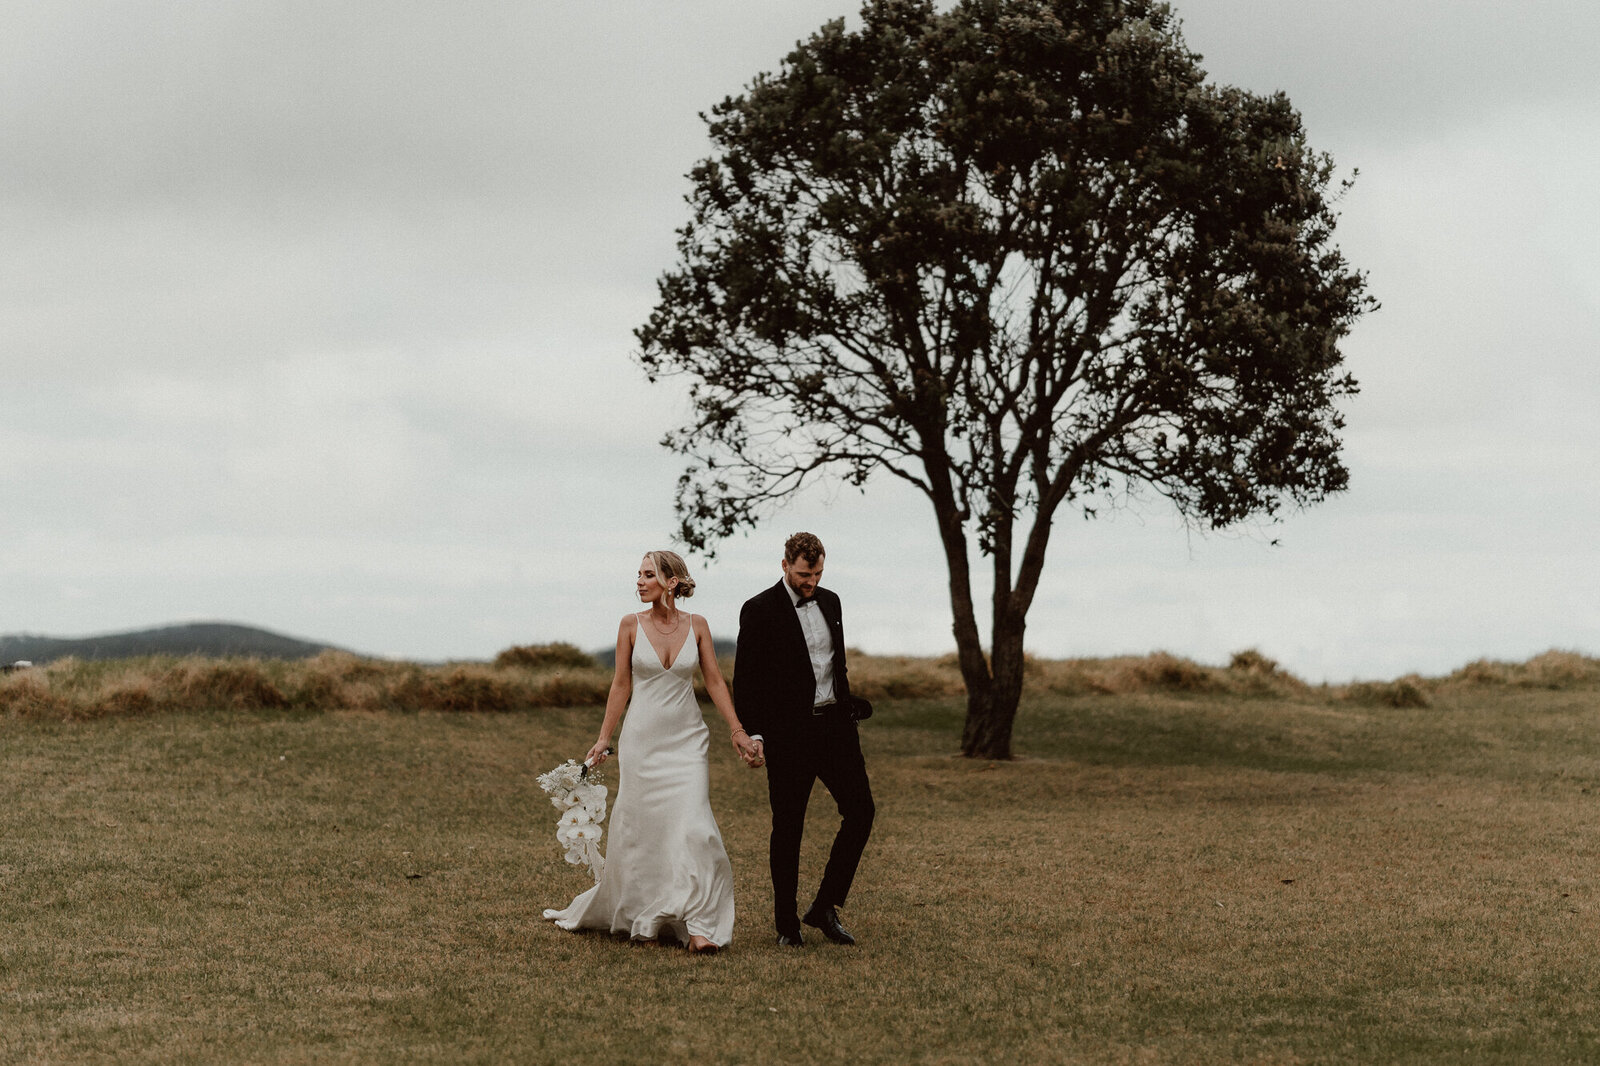 Wedding of an Auckland bride and groom at the coast in new zealand